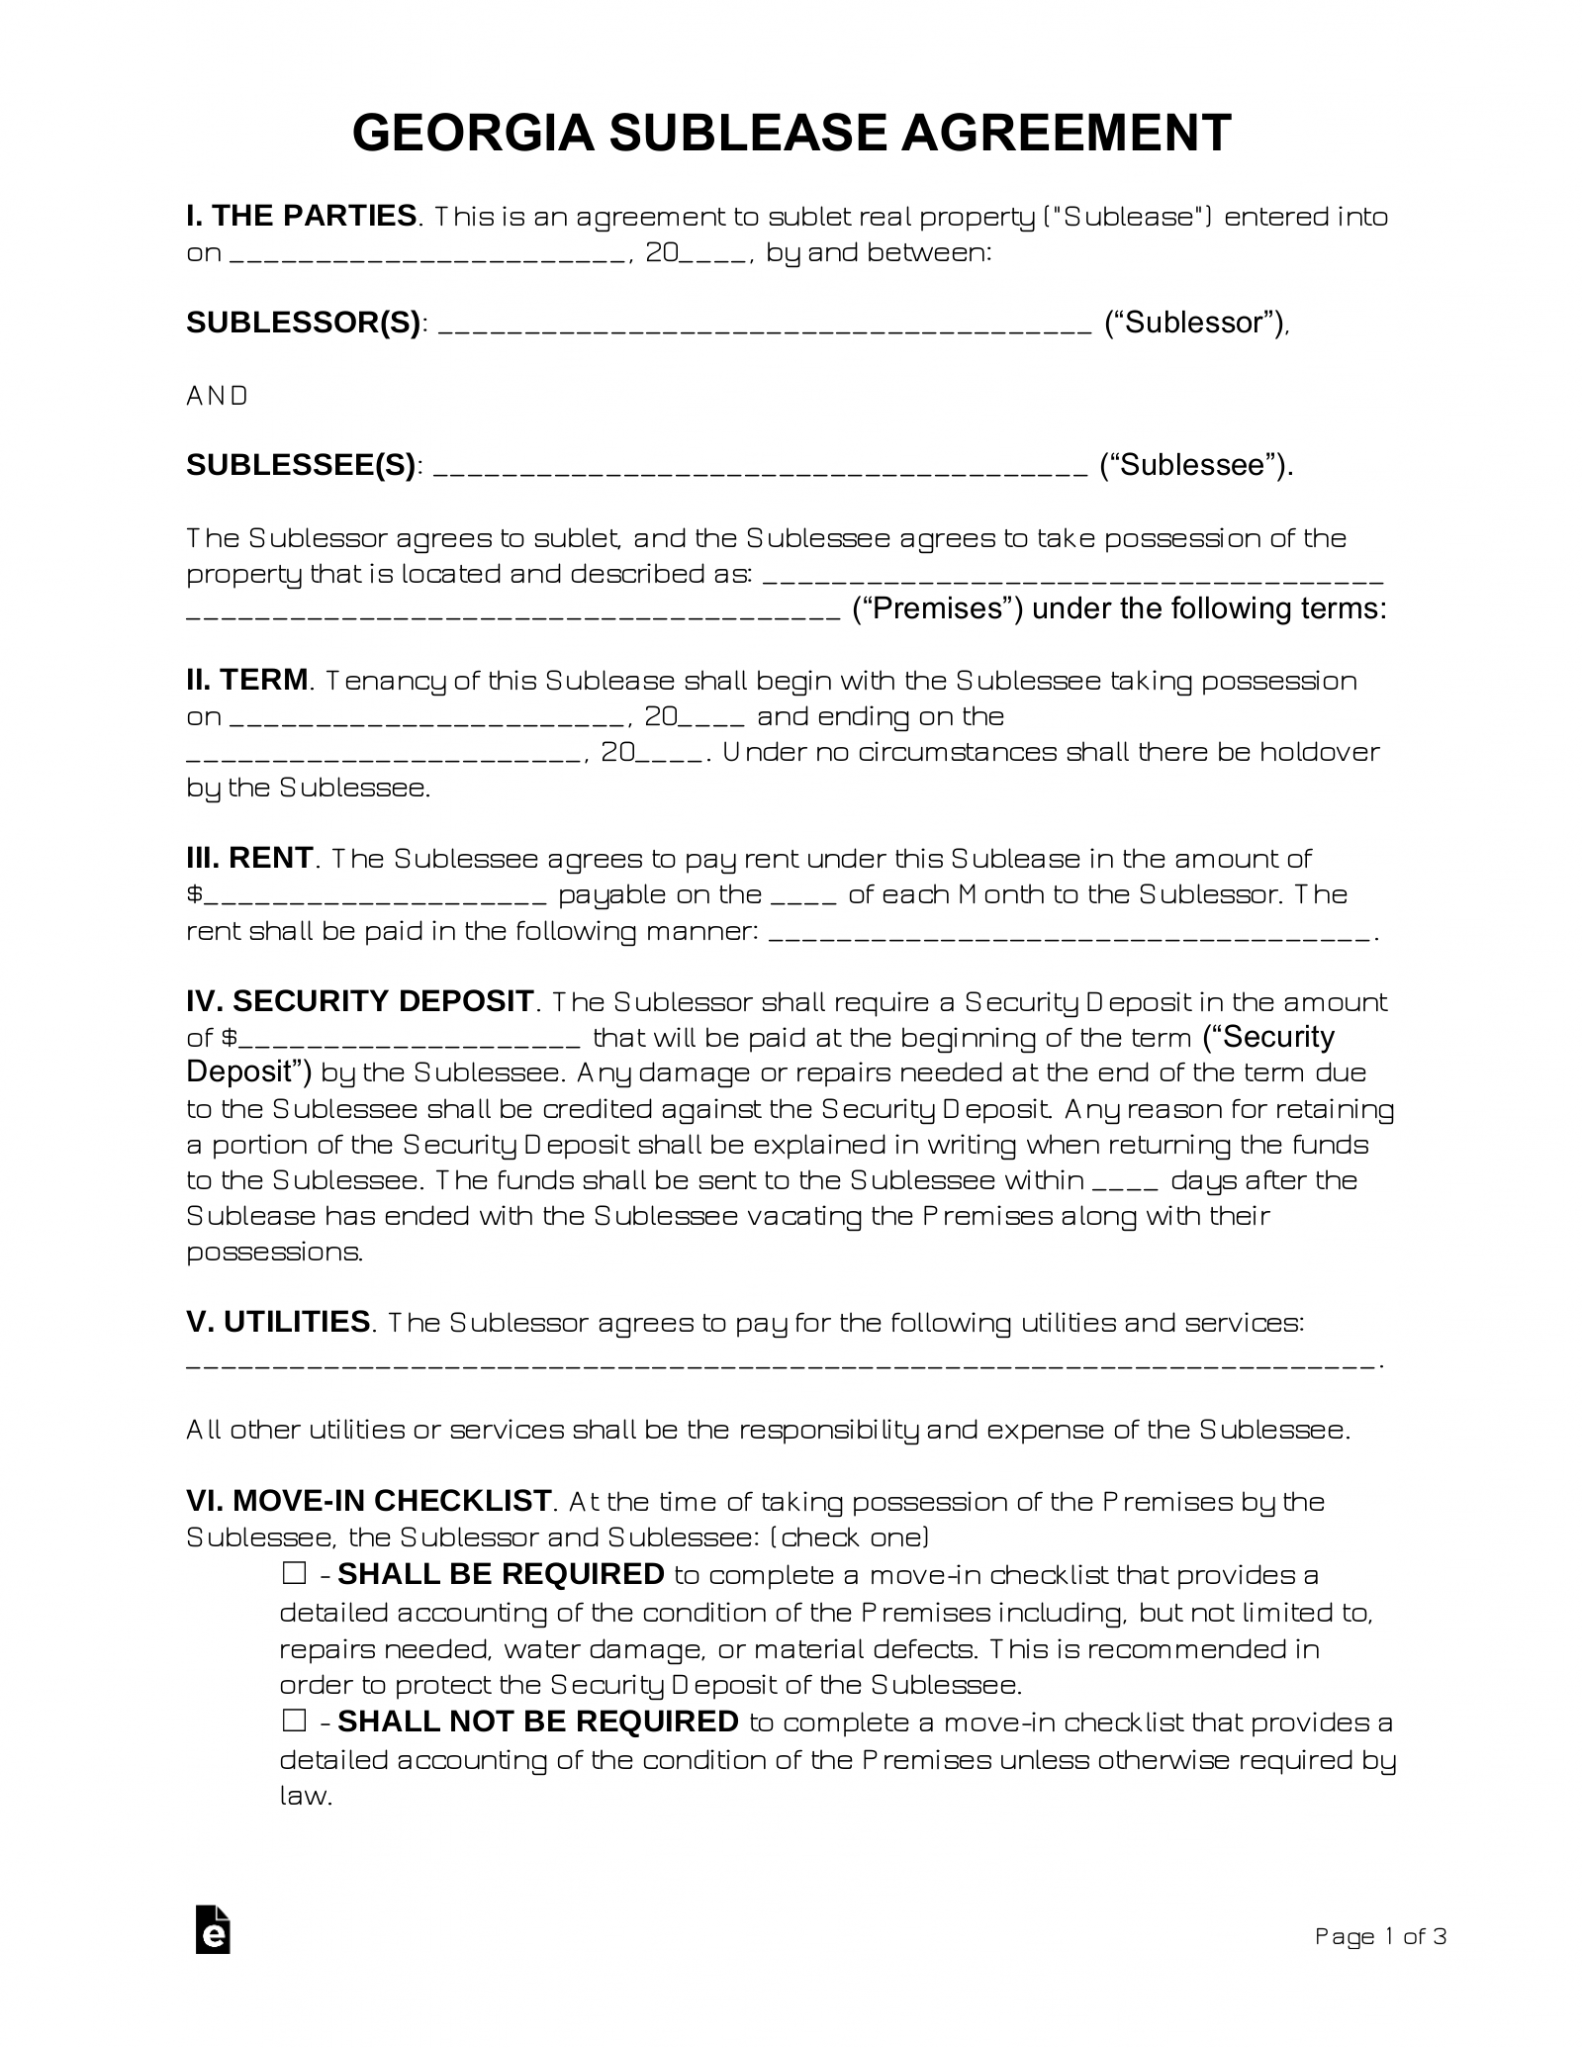 free-georgia-sublease-agreement-template-pdf-word-eforms